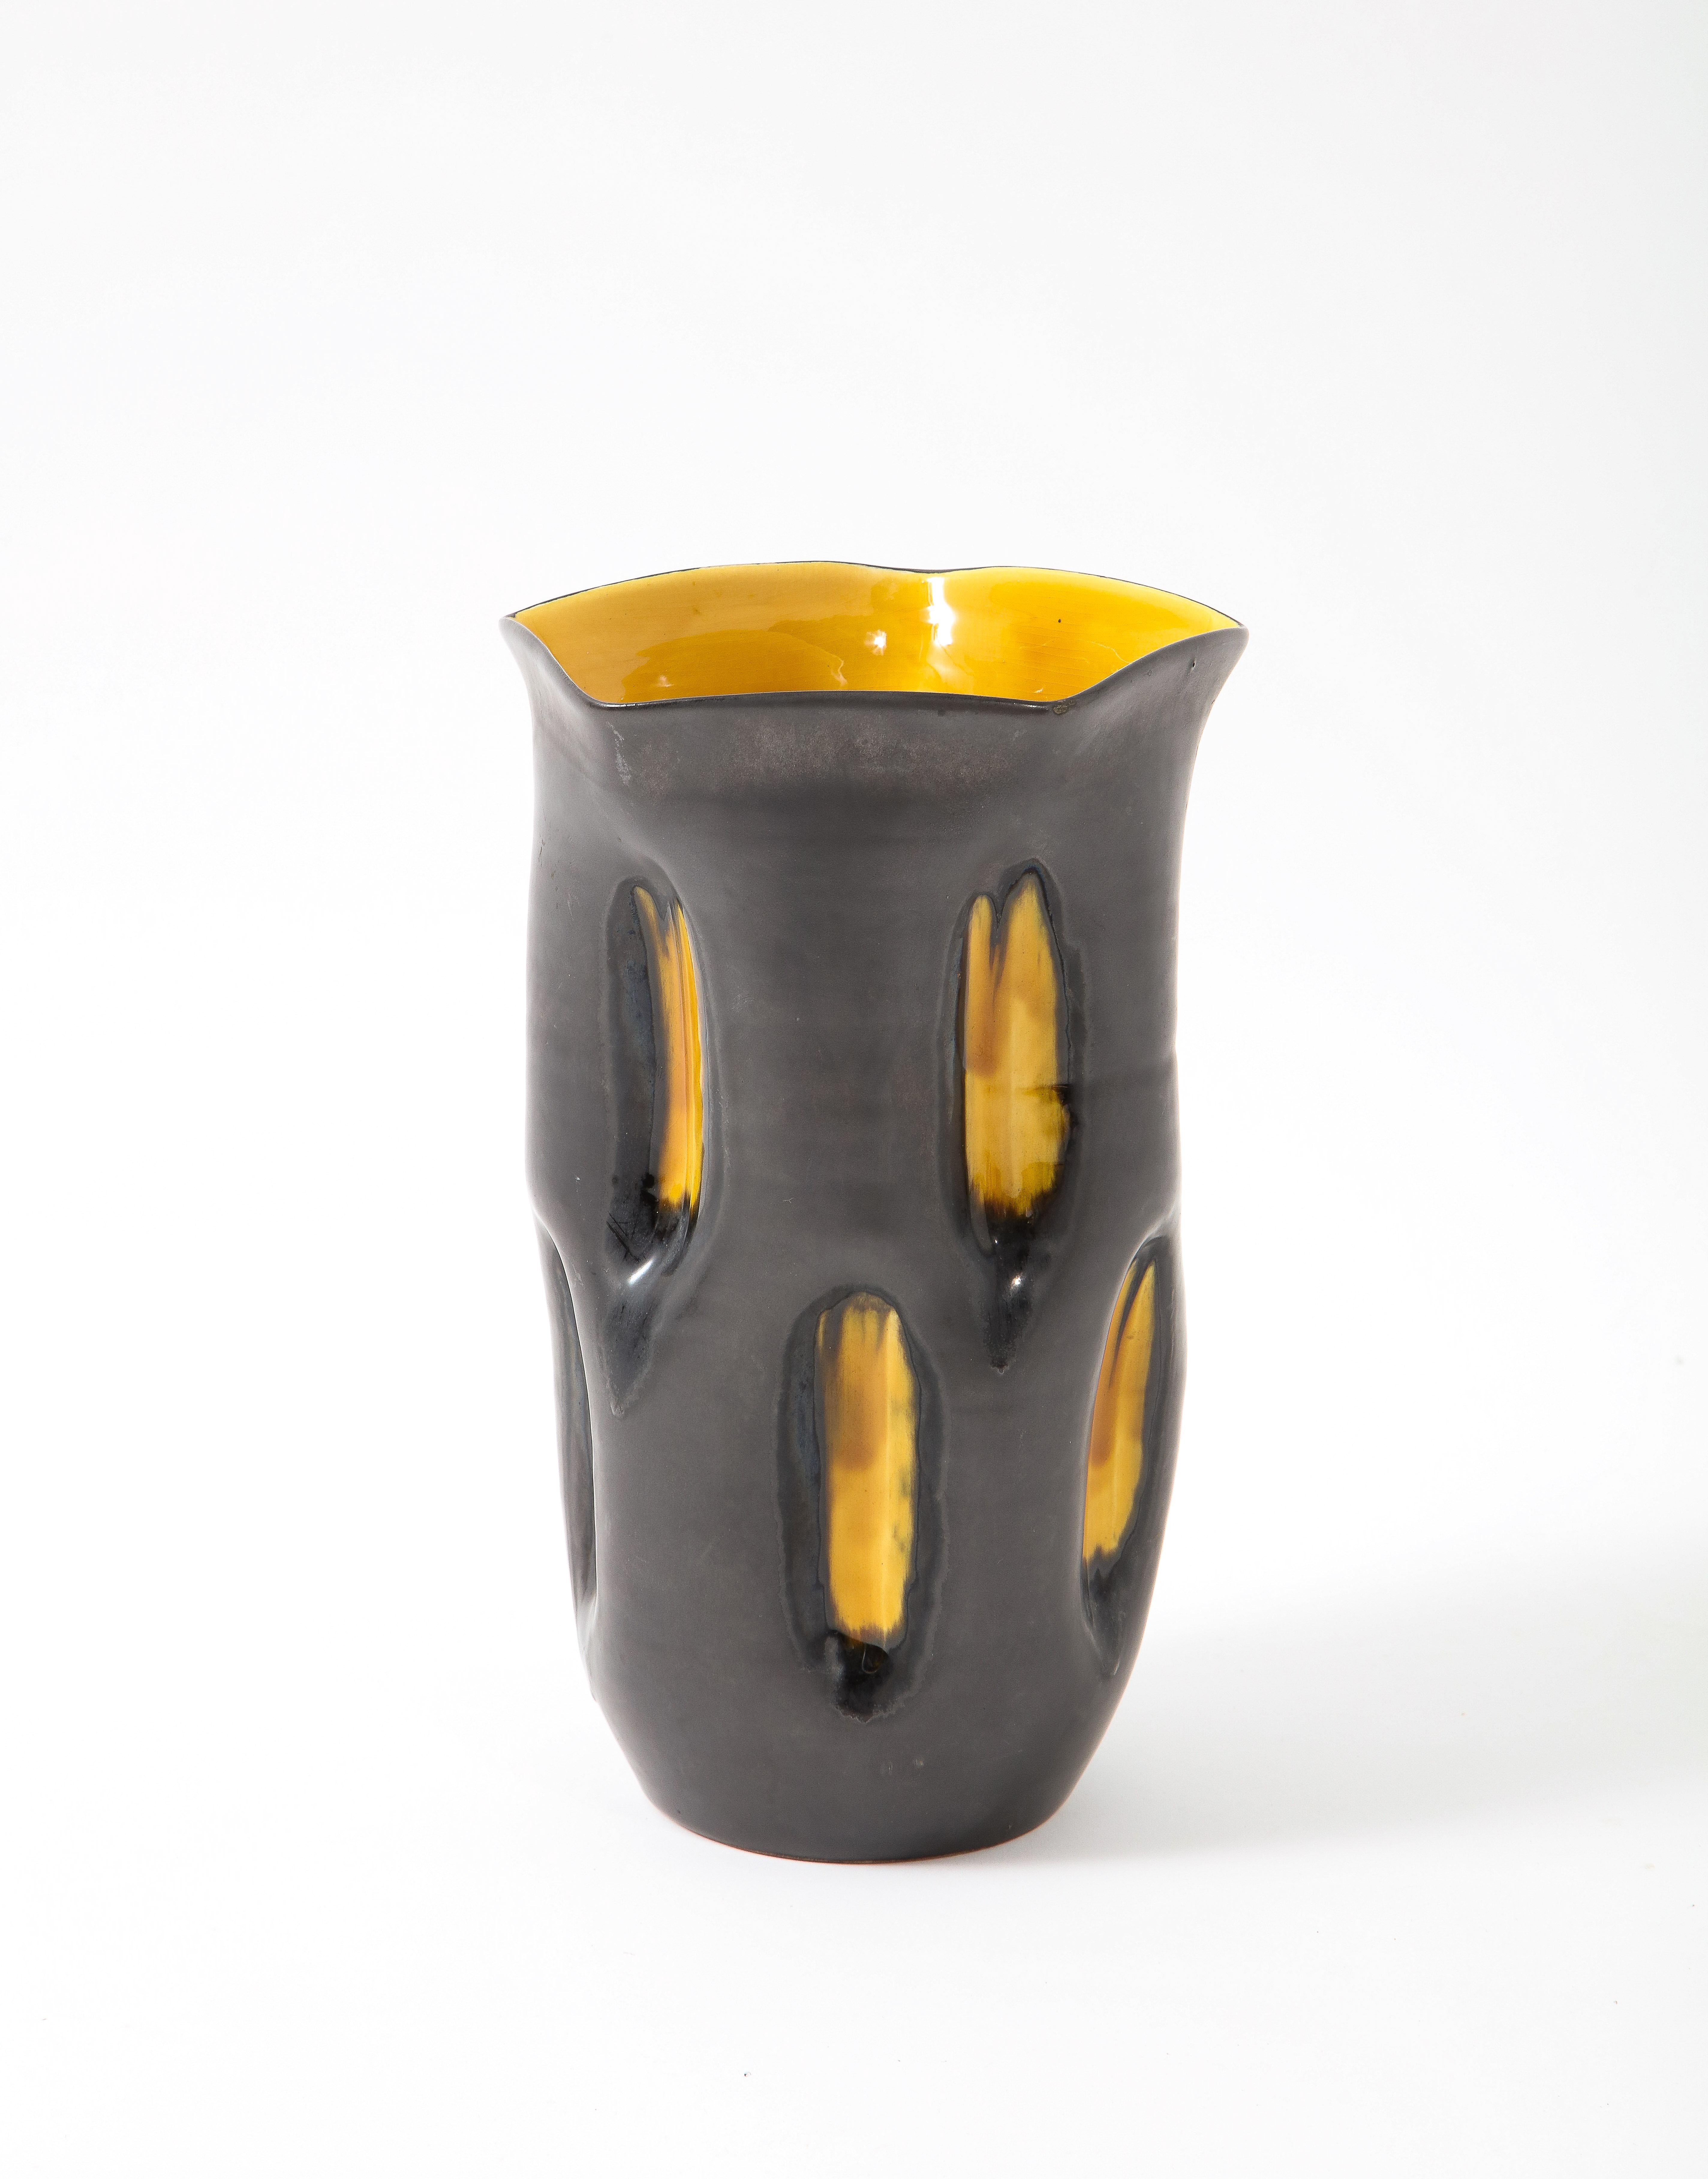 Whimsical ceramic vase with a two tone glaze, gunmetal grey for the body and a glossy yellow for the indents on its surface and the interior.